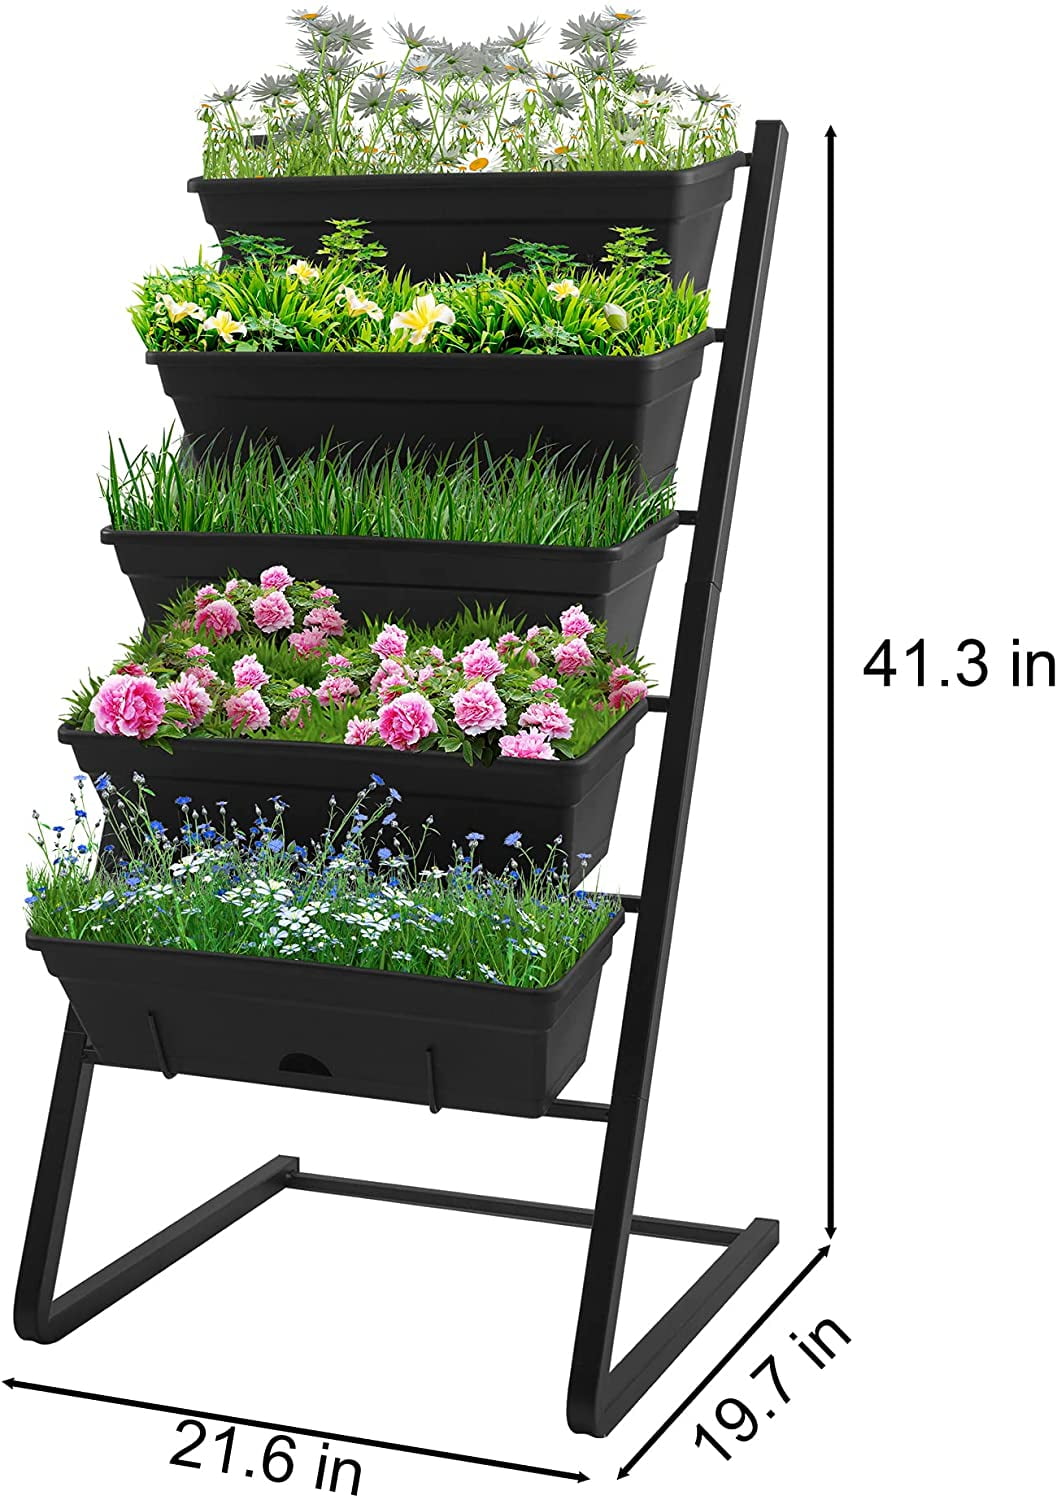 Vertical garden Planters outdoors Stackable rectangular planter box for Raised bed Recycled plastic Green wall planter Planter rack & liner Cachepots Agro Block 80 x 40 cm Urban Gardening 